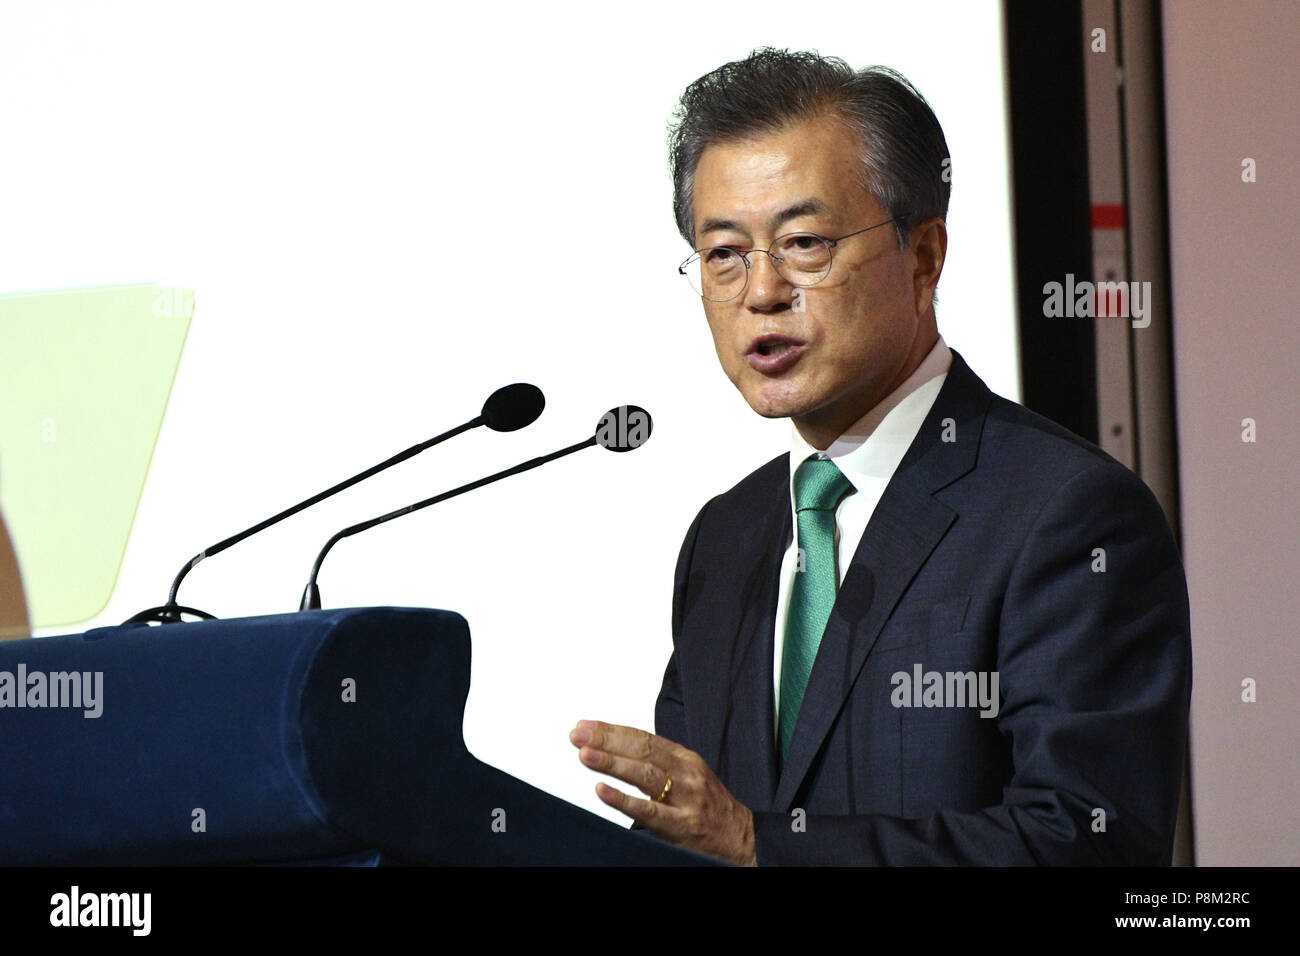 Singapore. 13th July, 2018. South Korean President Moon Jae-in speaks during the 42nd Singapore Lecture in Singapore on July 13, 2018. Credit: Then Chih Wey/Xinhua/Alamy Live News Stock Photo